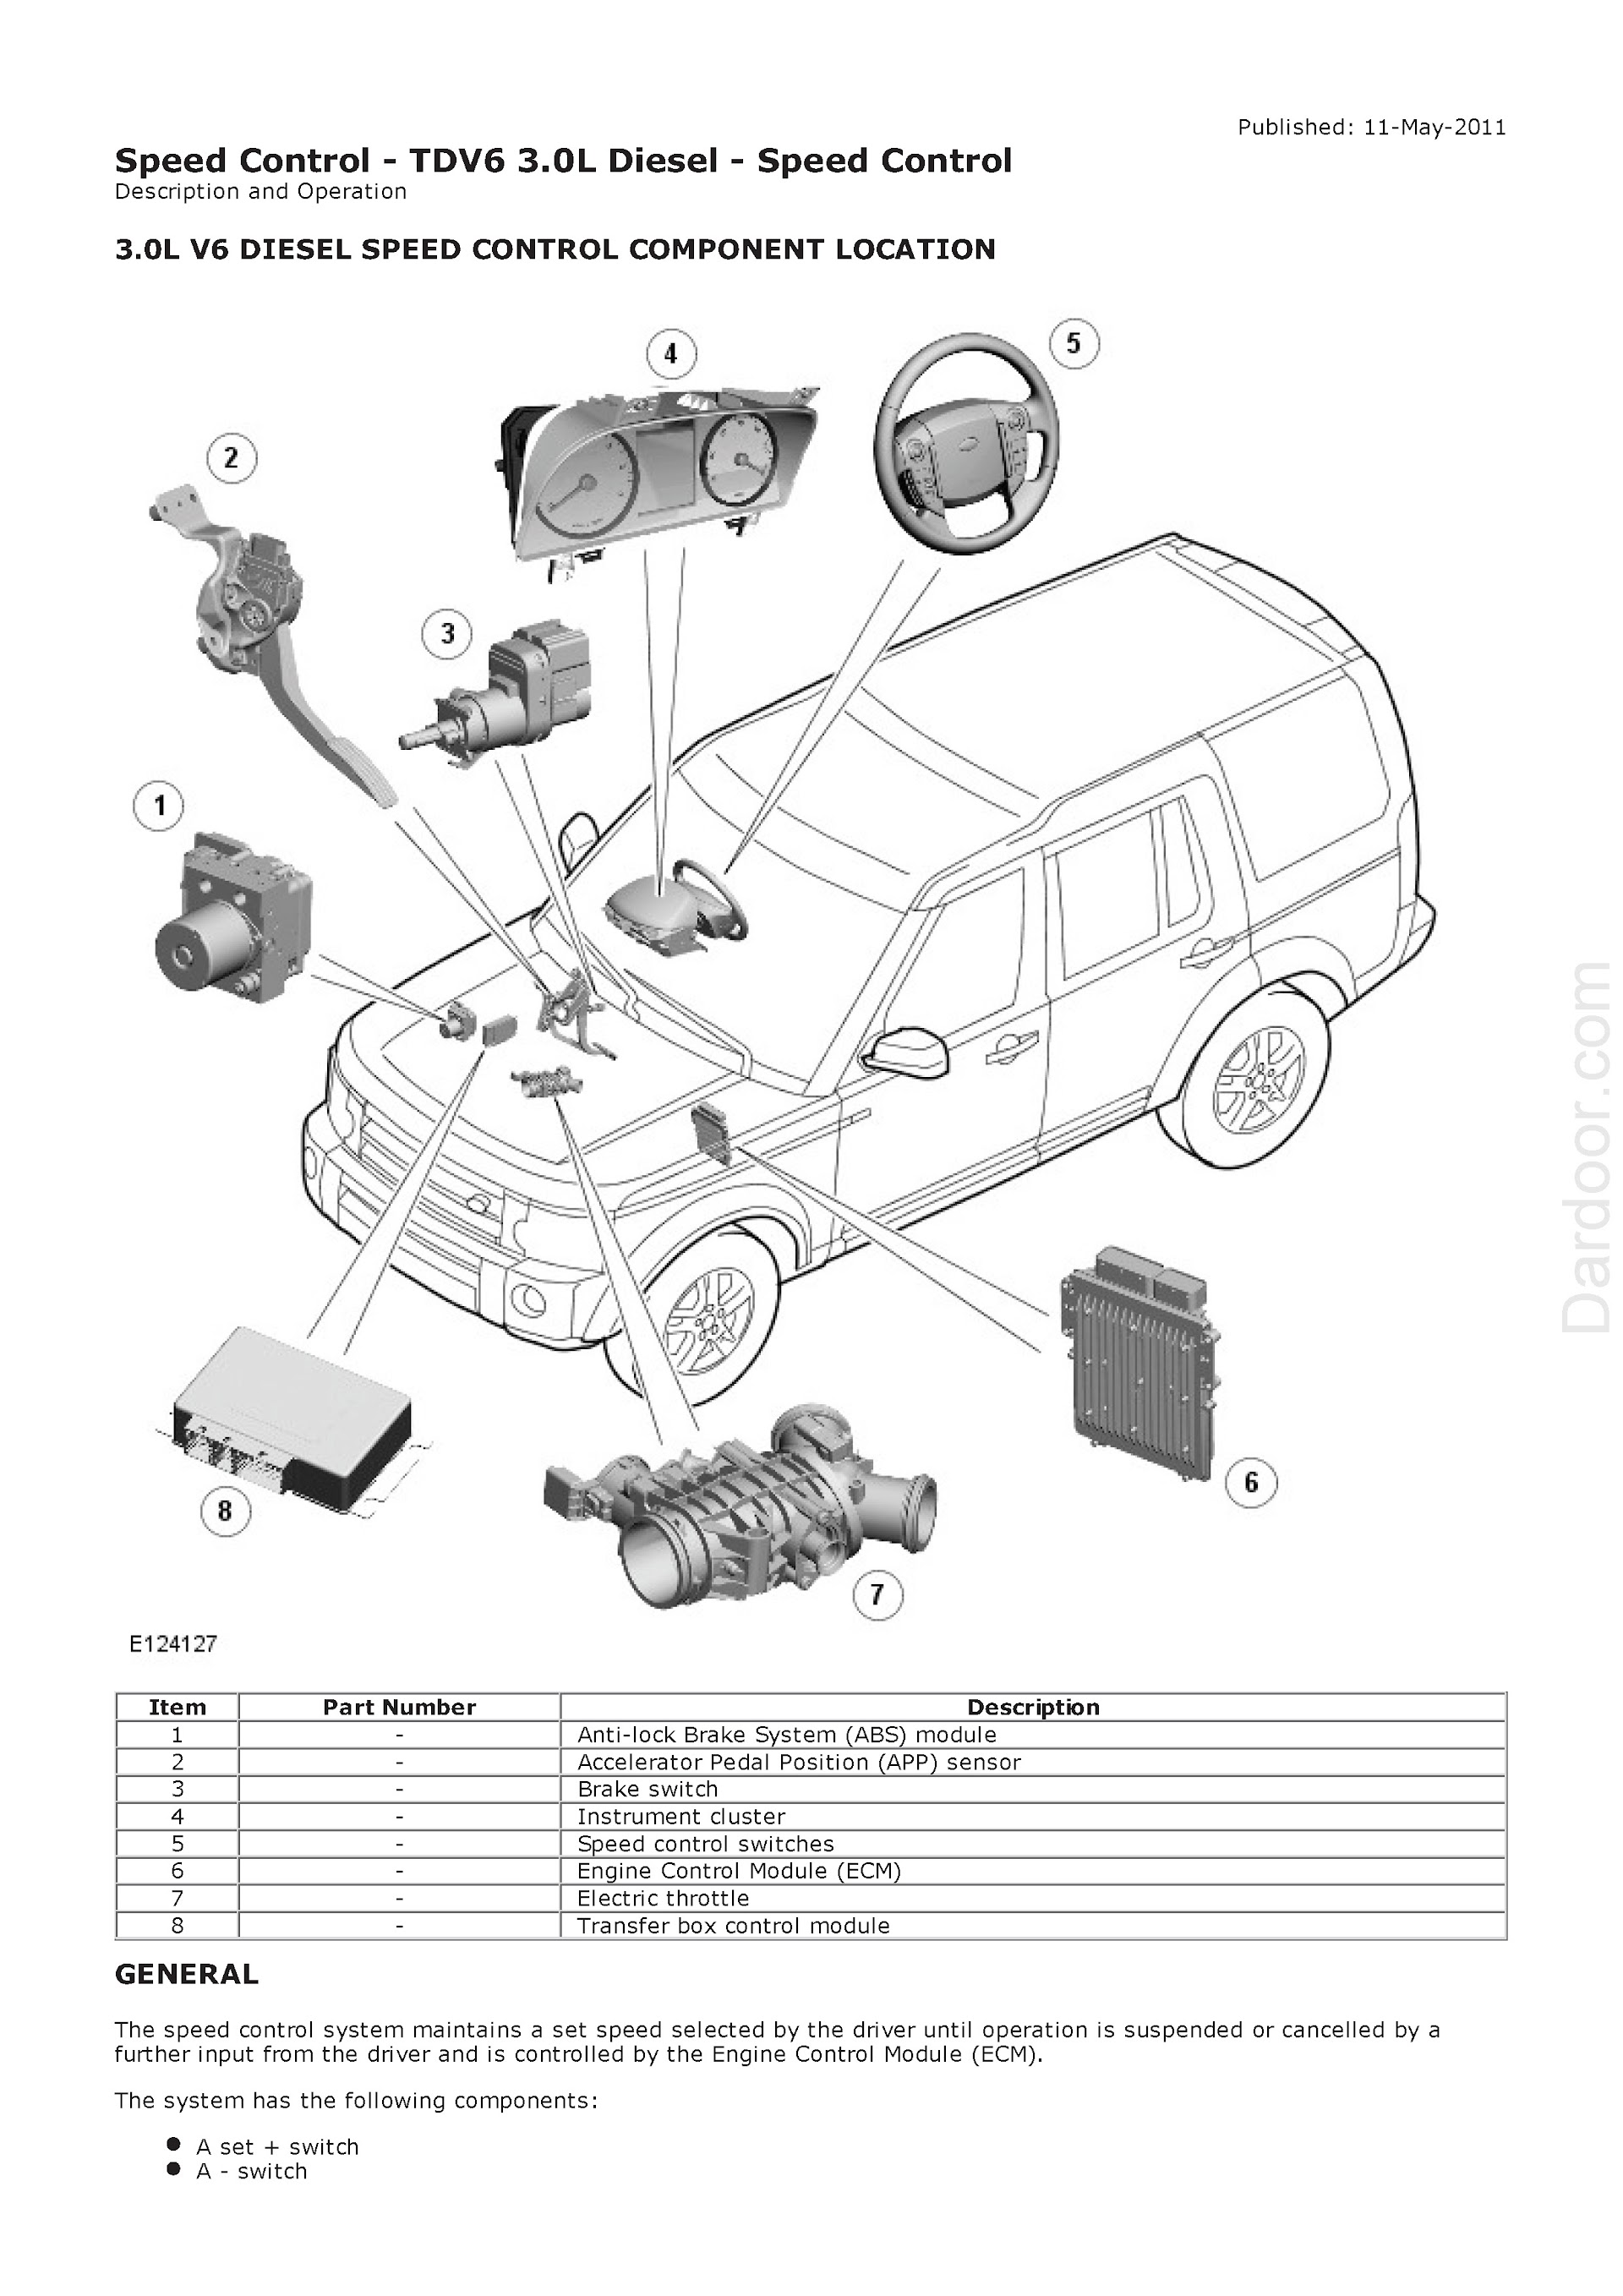 Download 2009-2011 Land Rover Discovery 4 Service Repair Manual.